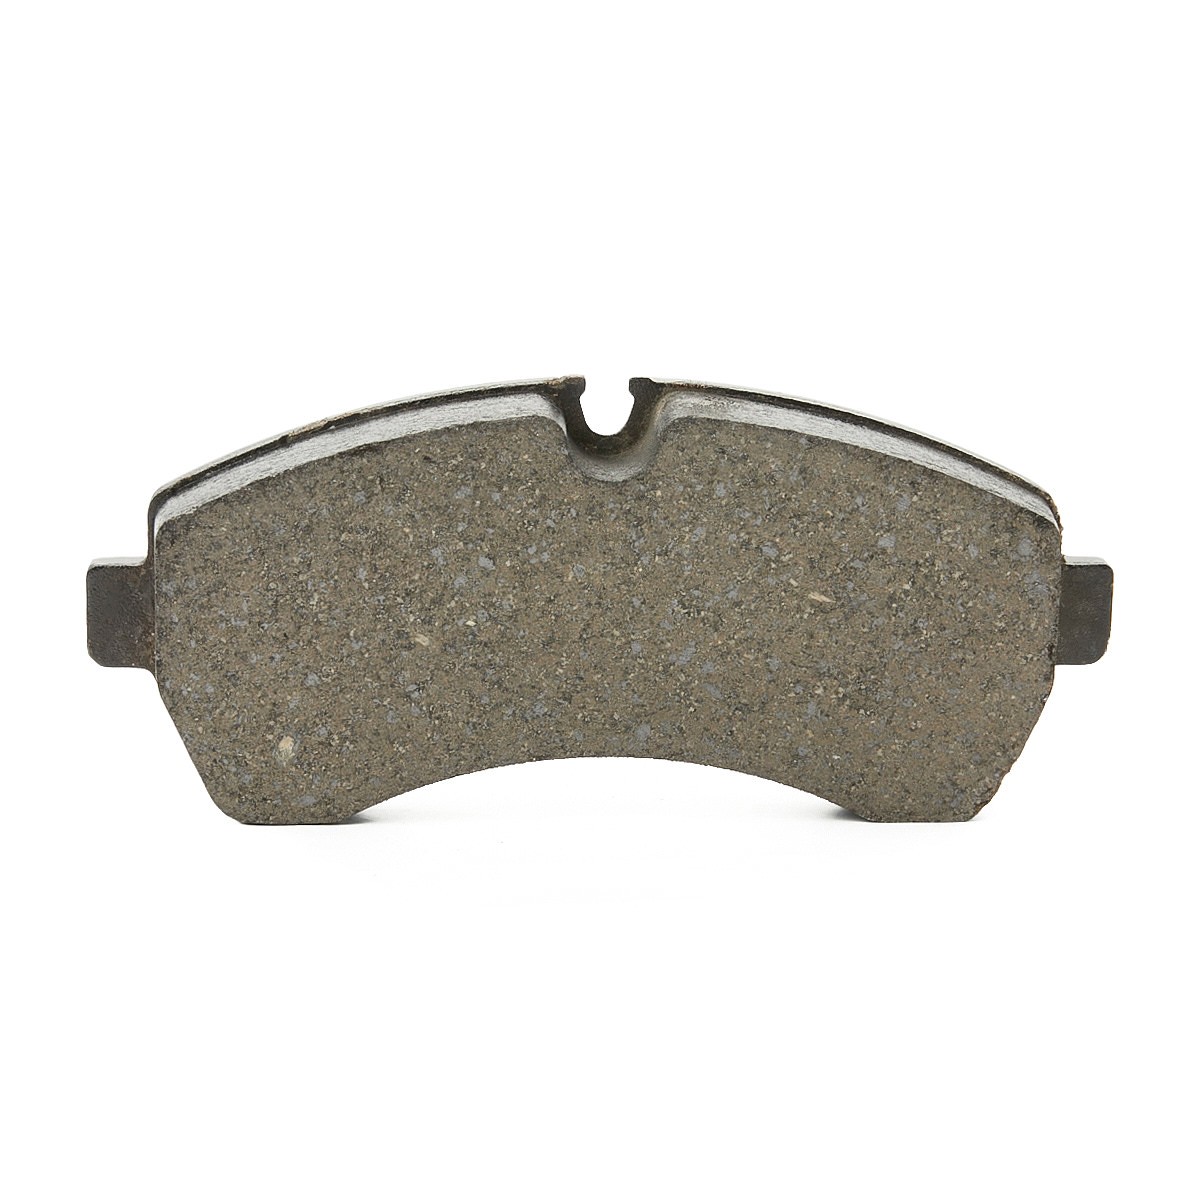 13.0460-4827.2 Set of brake pads 604827 ATE prepared for wear indicator, excl. wear warning contact, with brake caliper screws, with accessories